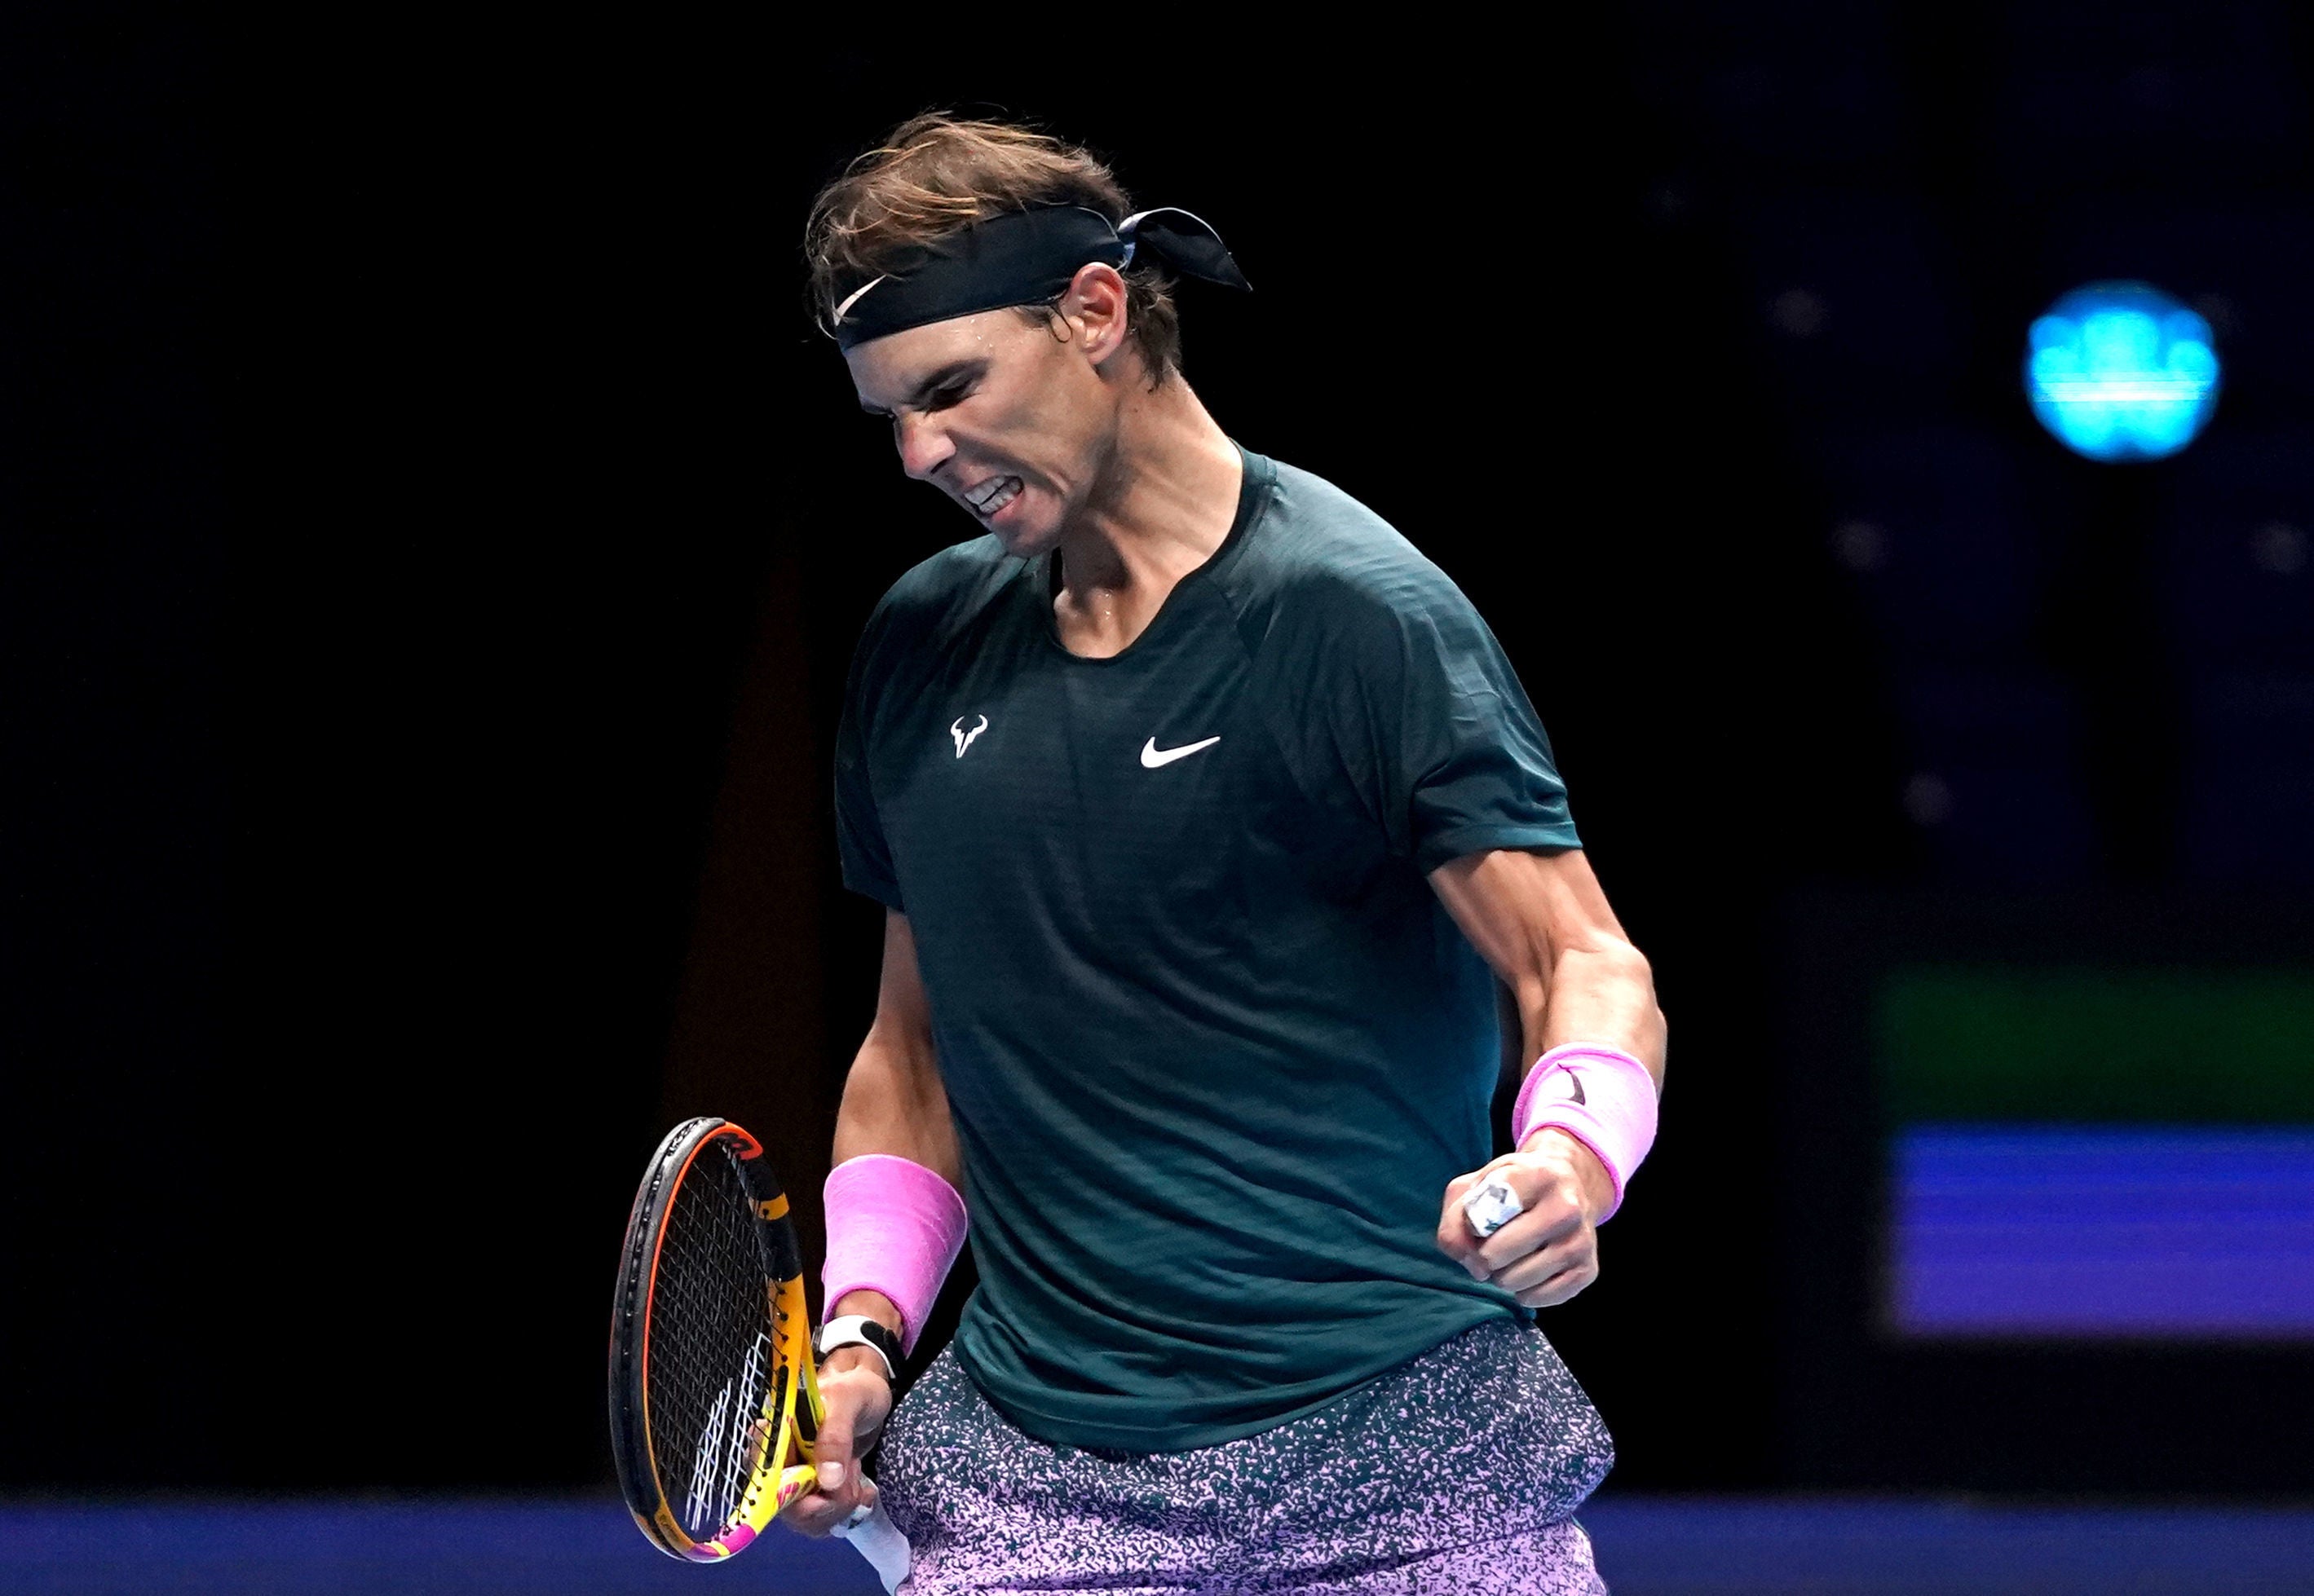 ATP Finals Rafael Nadal off to positive start but players feel absence of fans inside O2 Arena The Independent